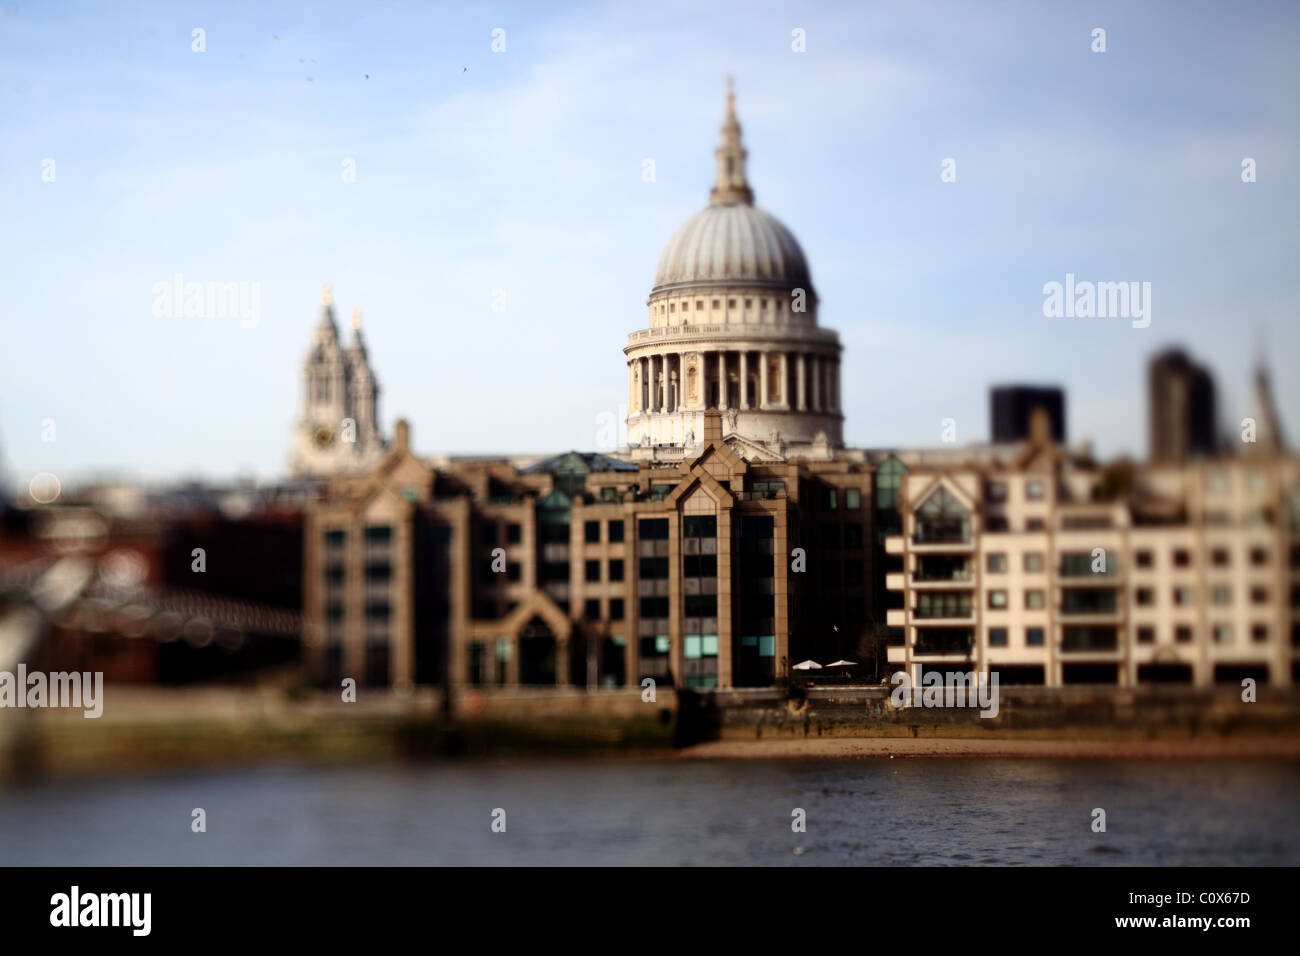 London's iconic Saint paul's cathedral view taken with tilt shift lens Stock Photo